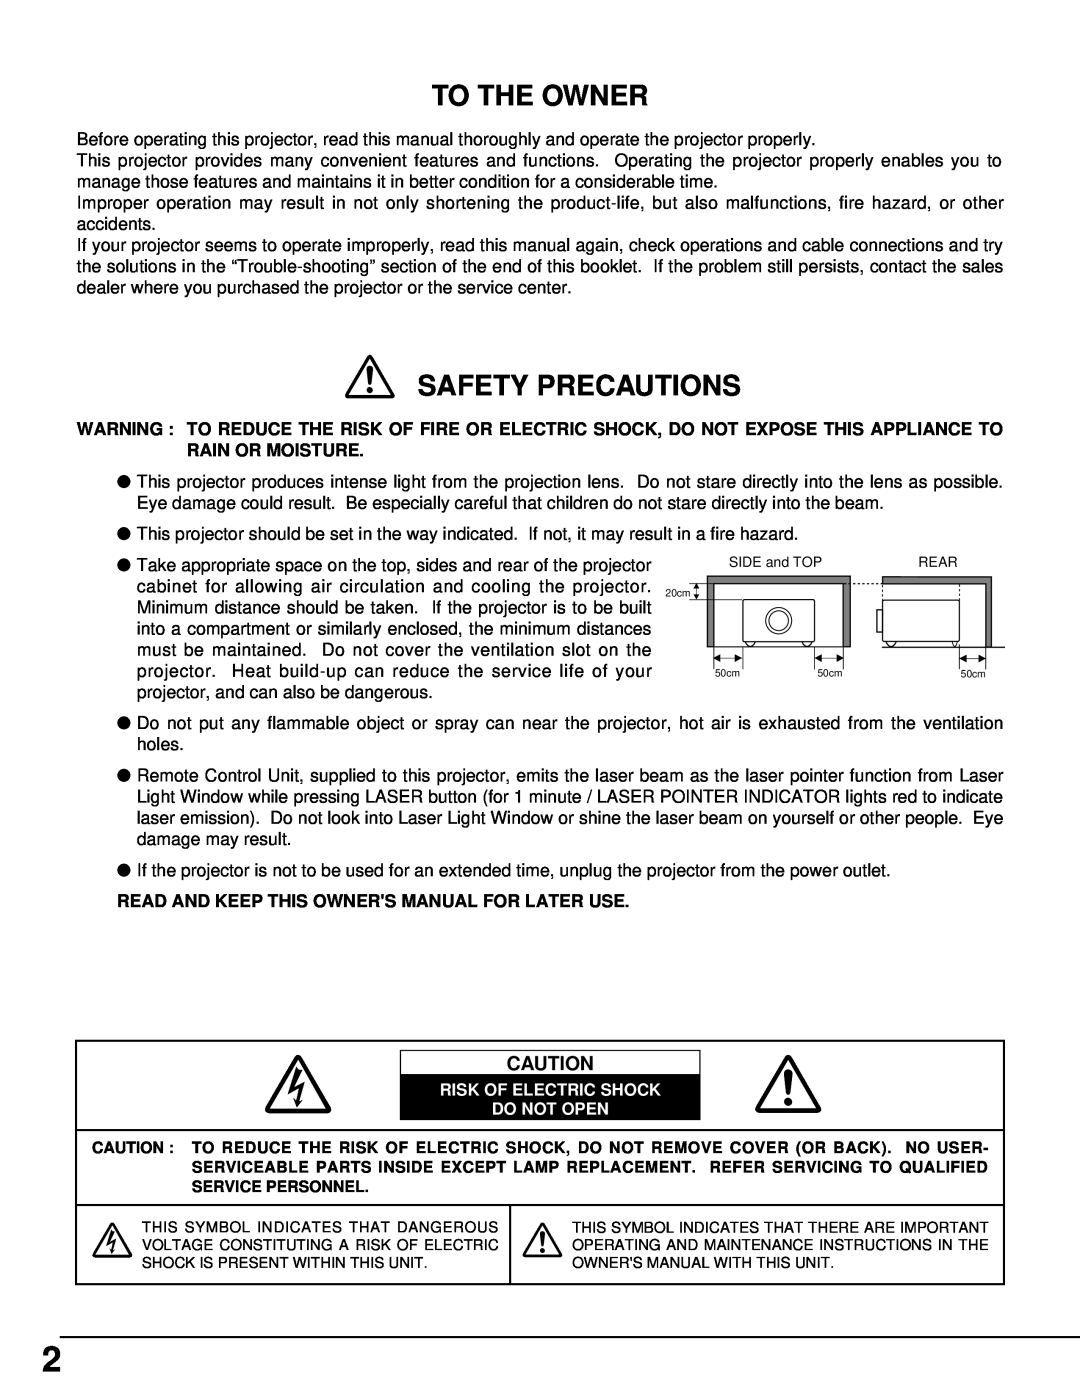 Eiki LC-XNB3W owner manual To The Owner, Safety Precautions, Read And Keep This Owners Manual For Later Use 